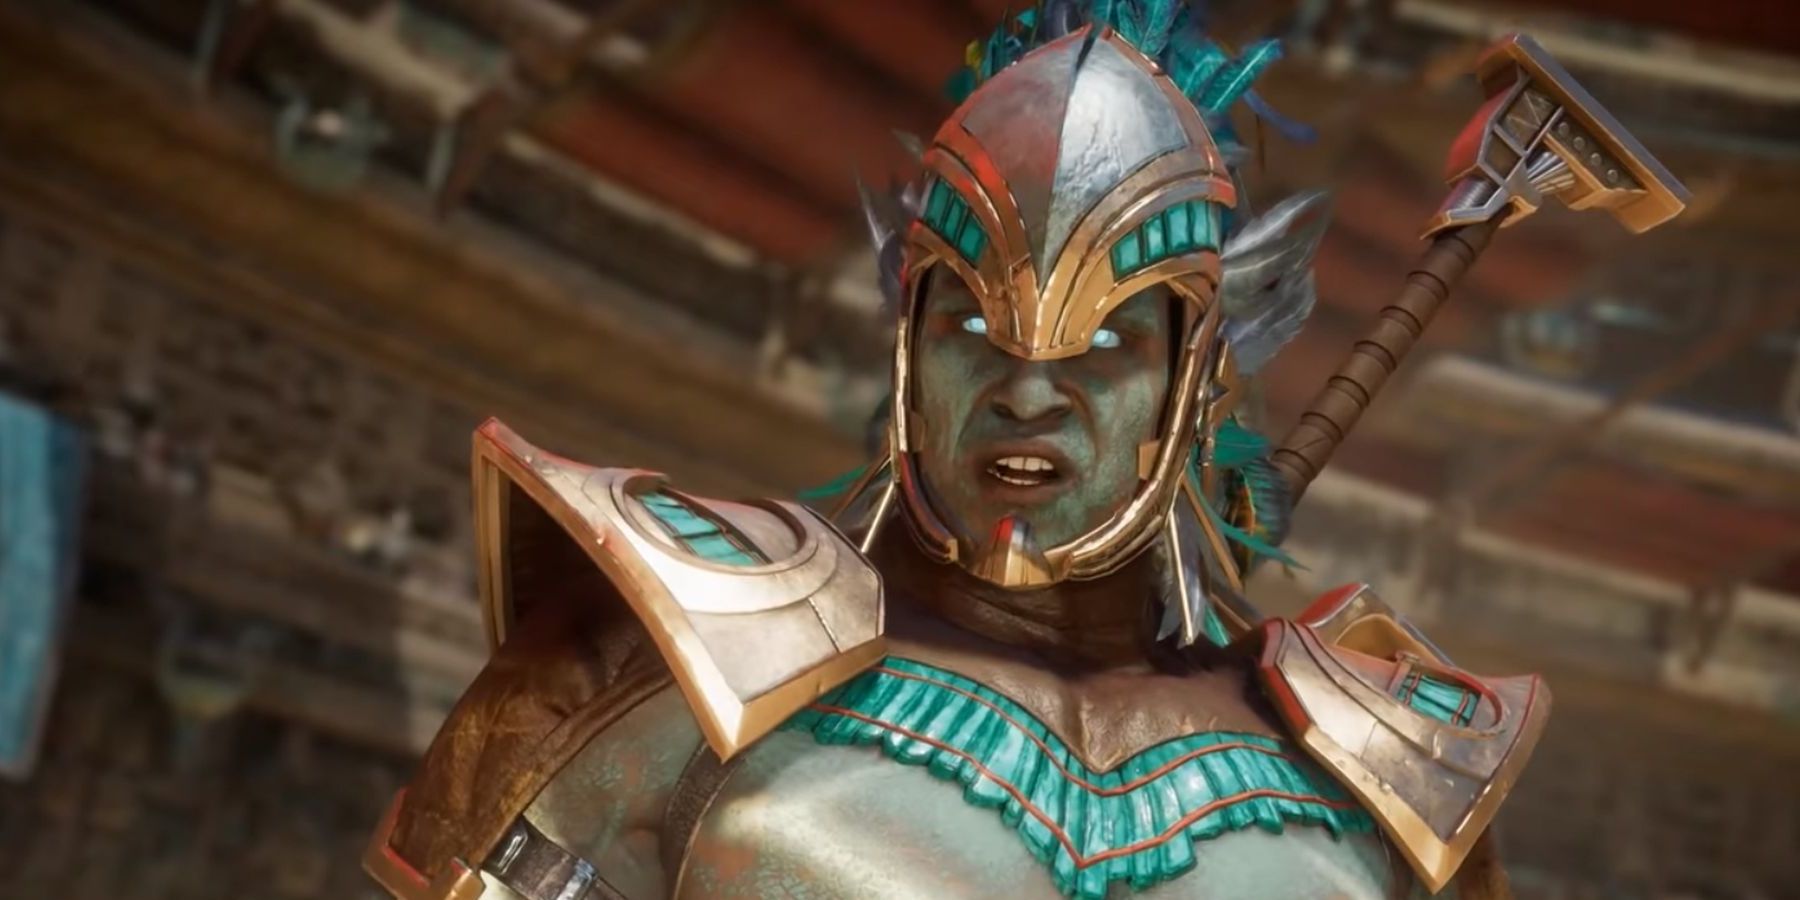 Mortal Kombat's Kotal Khan in armor and in front of the camera